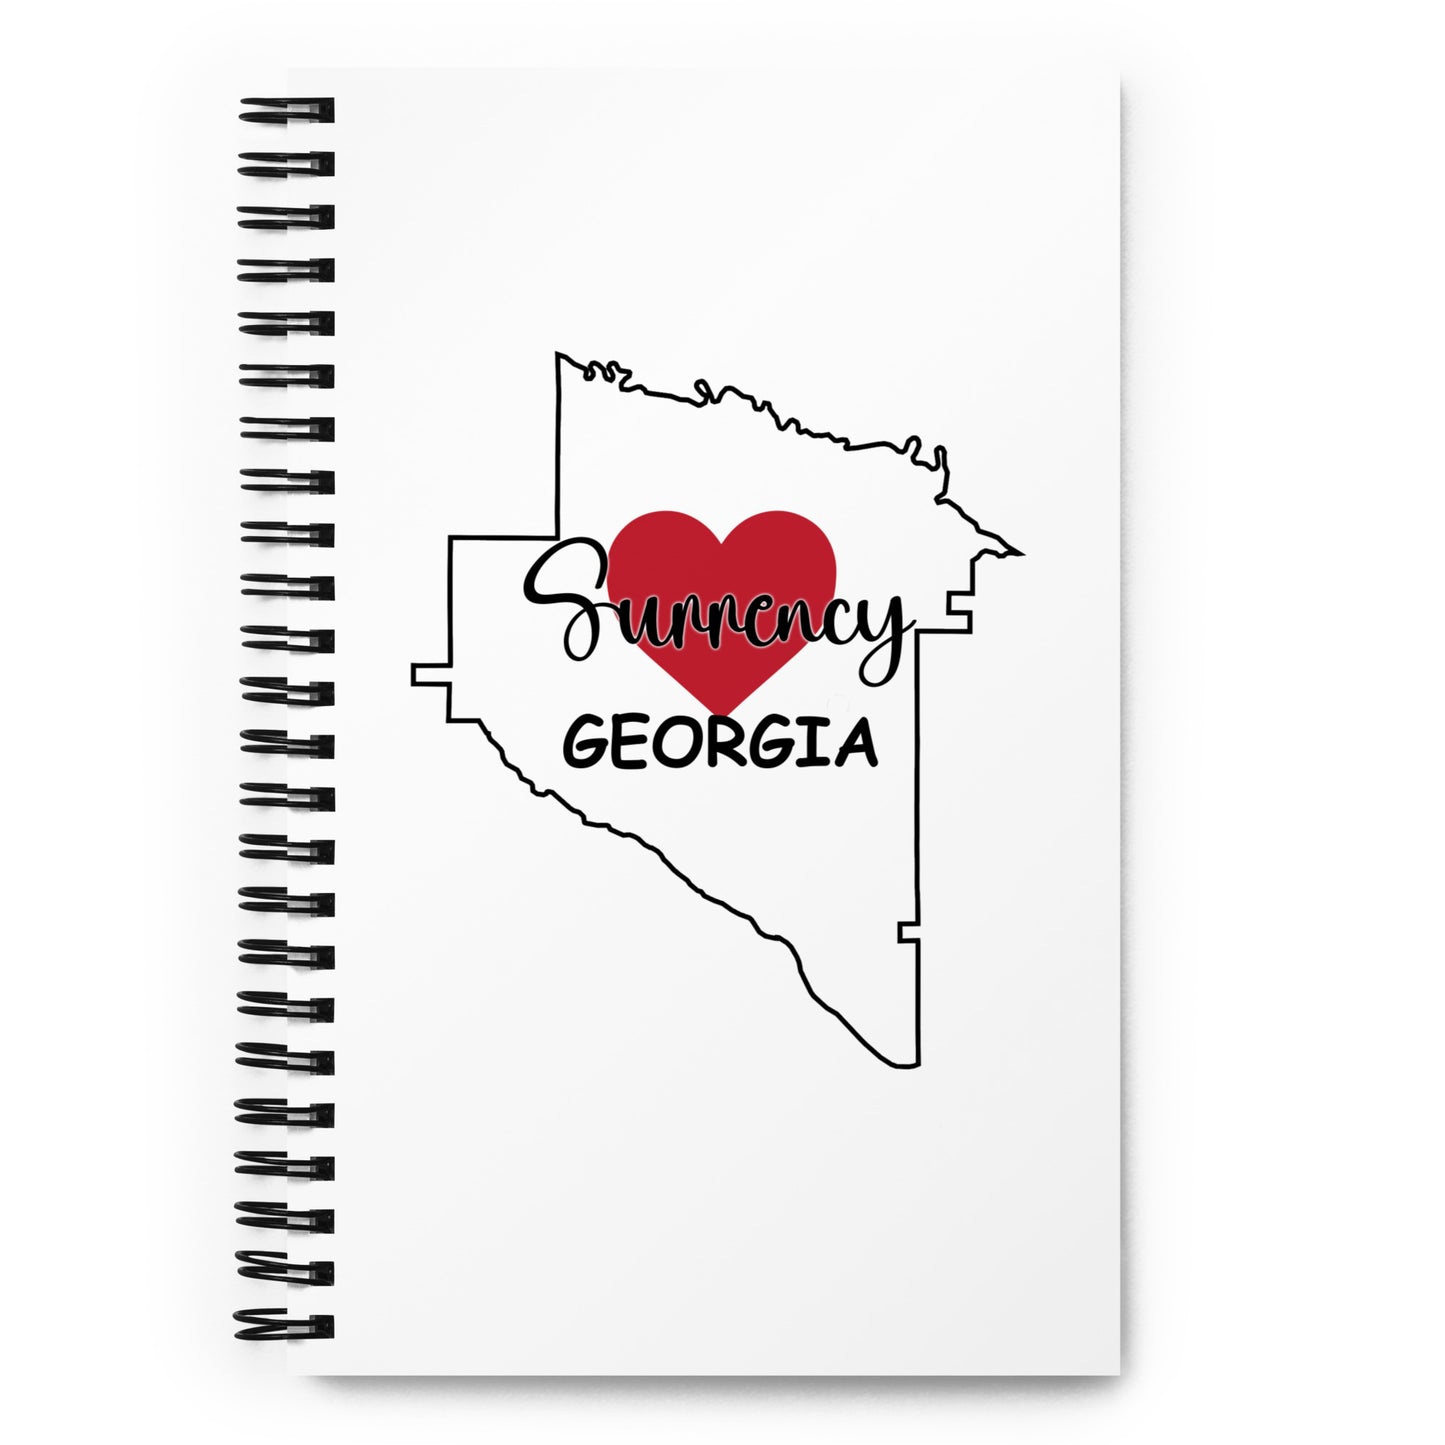 Surrency Georgia - Heart in County Outline Spiral notebook